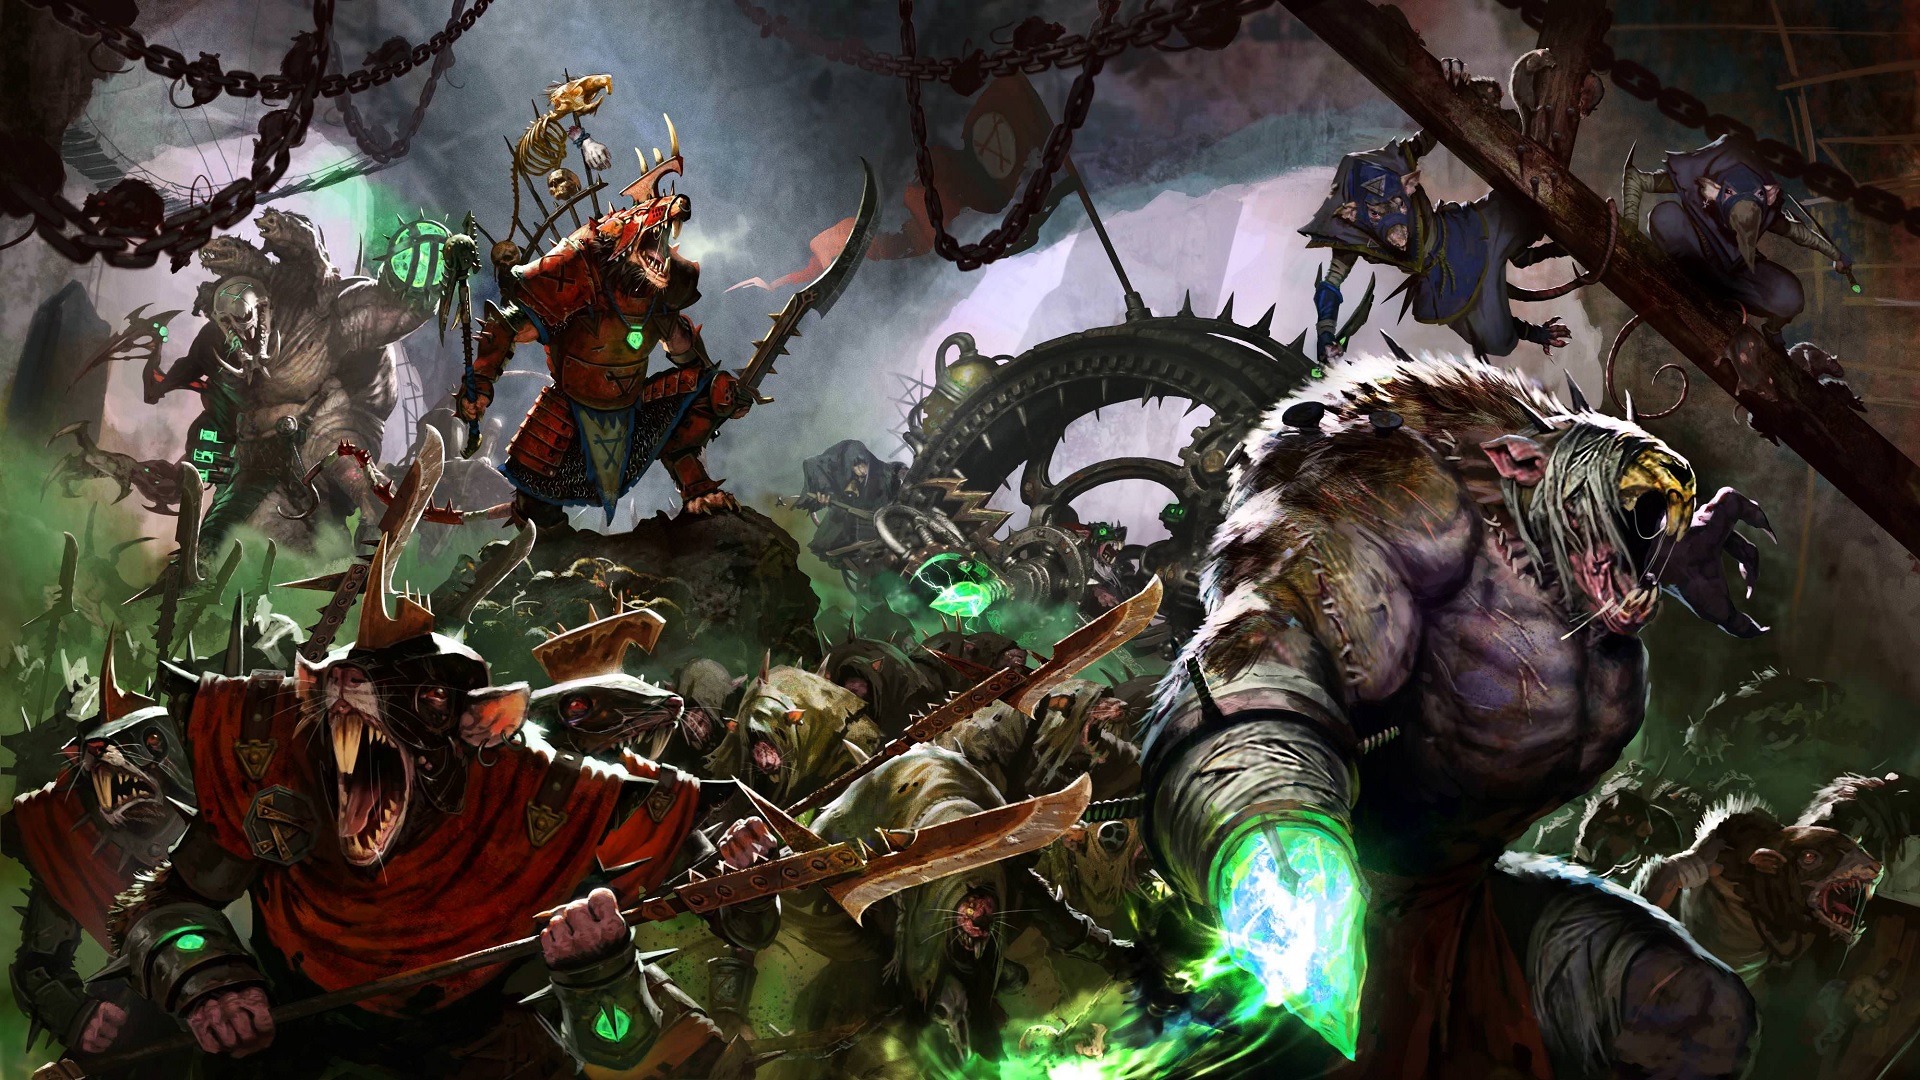 Total War Warhammer 2 Skaven race guide their campaign and battle